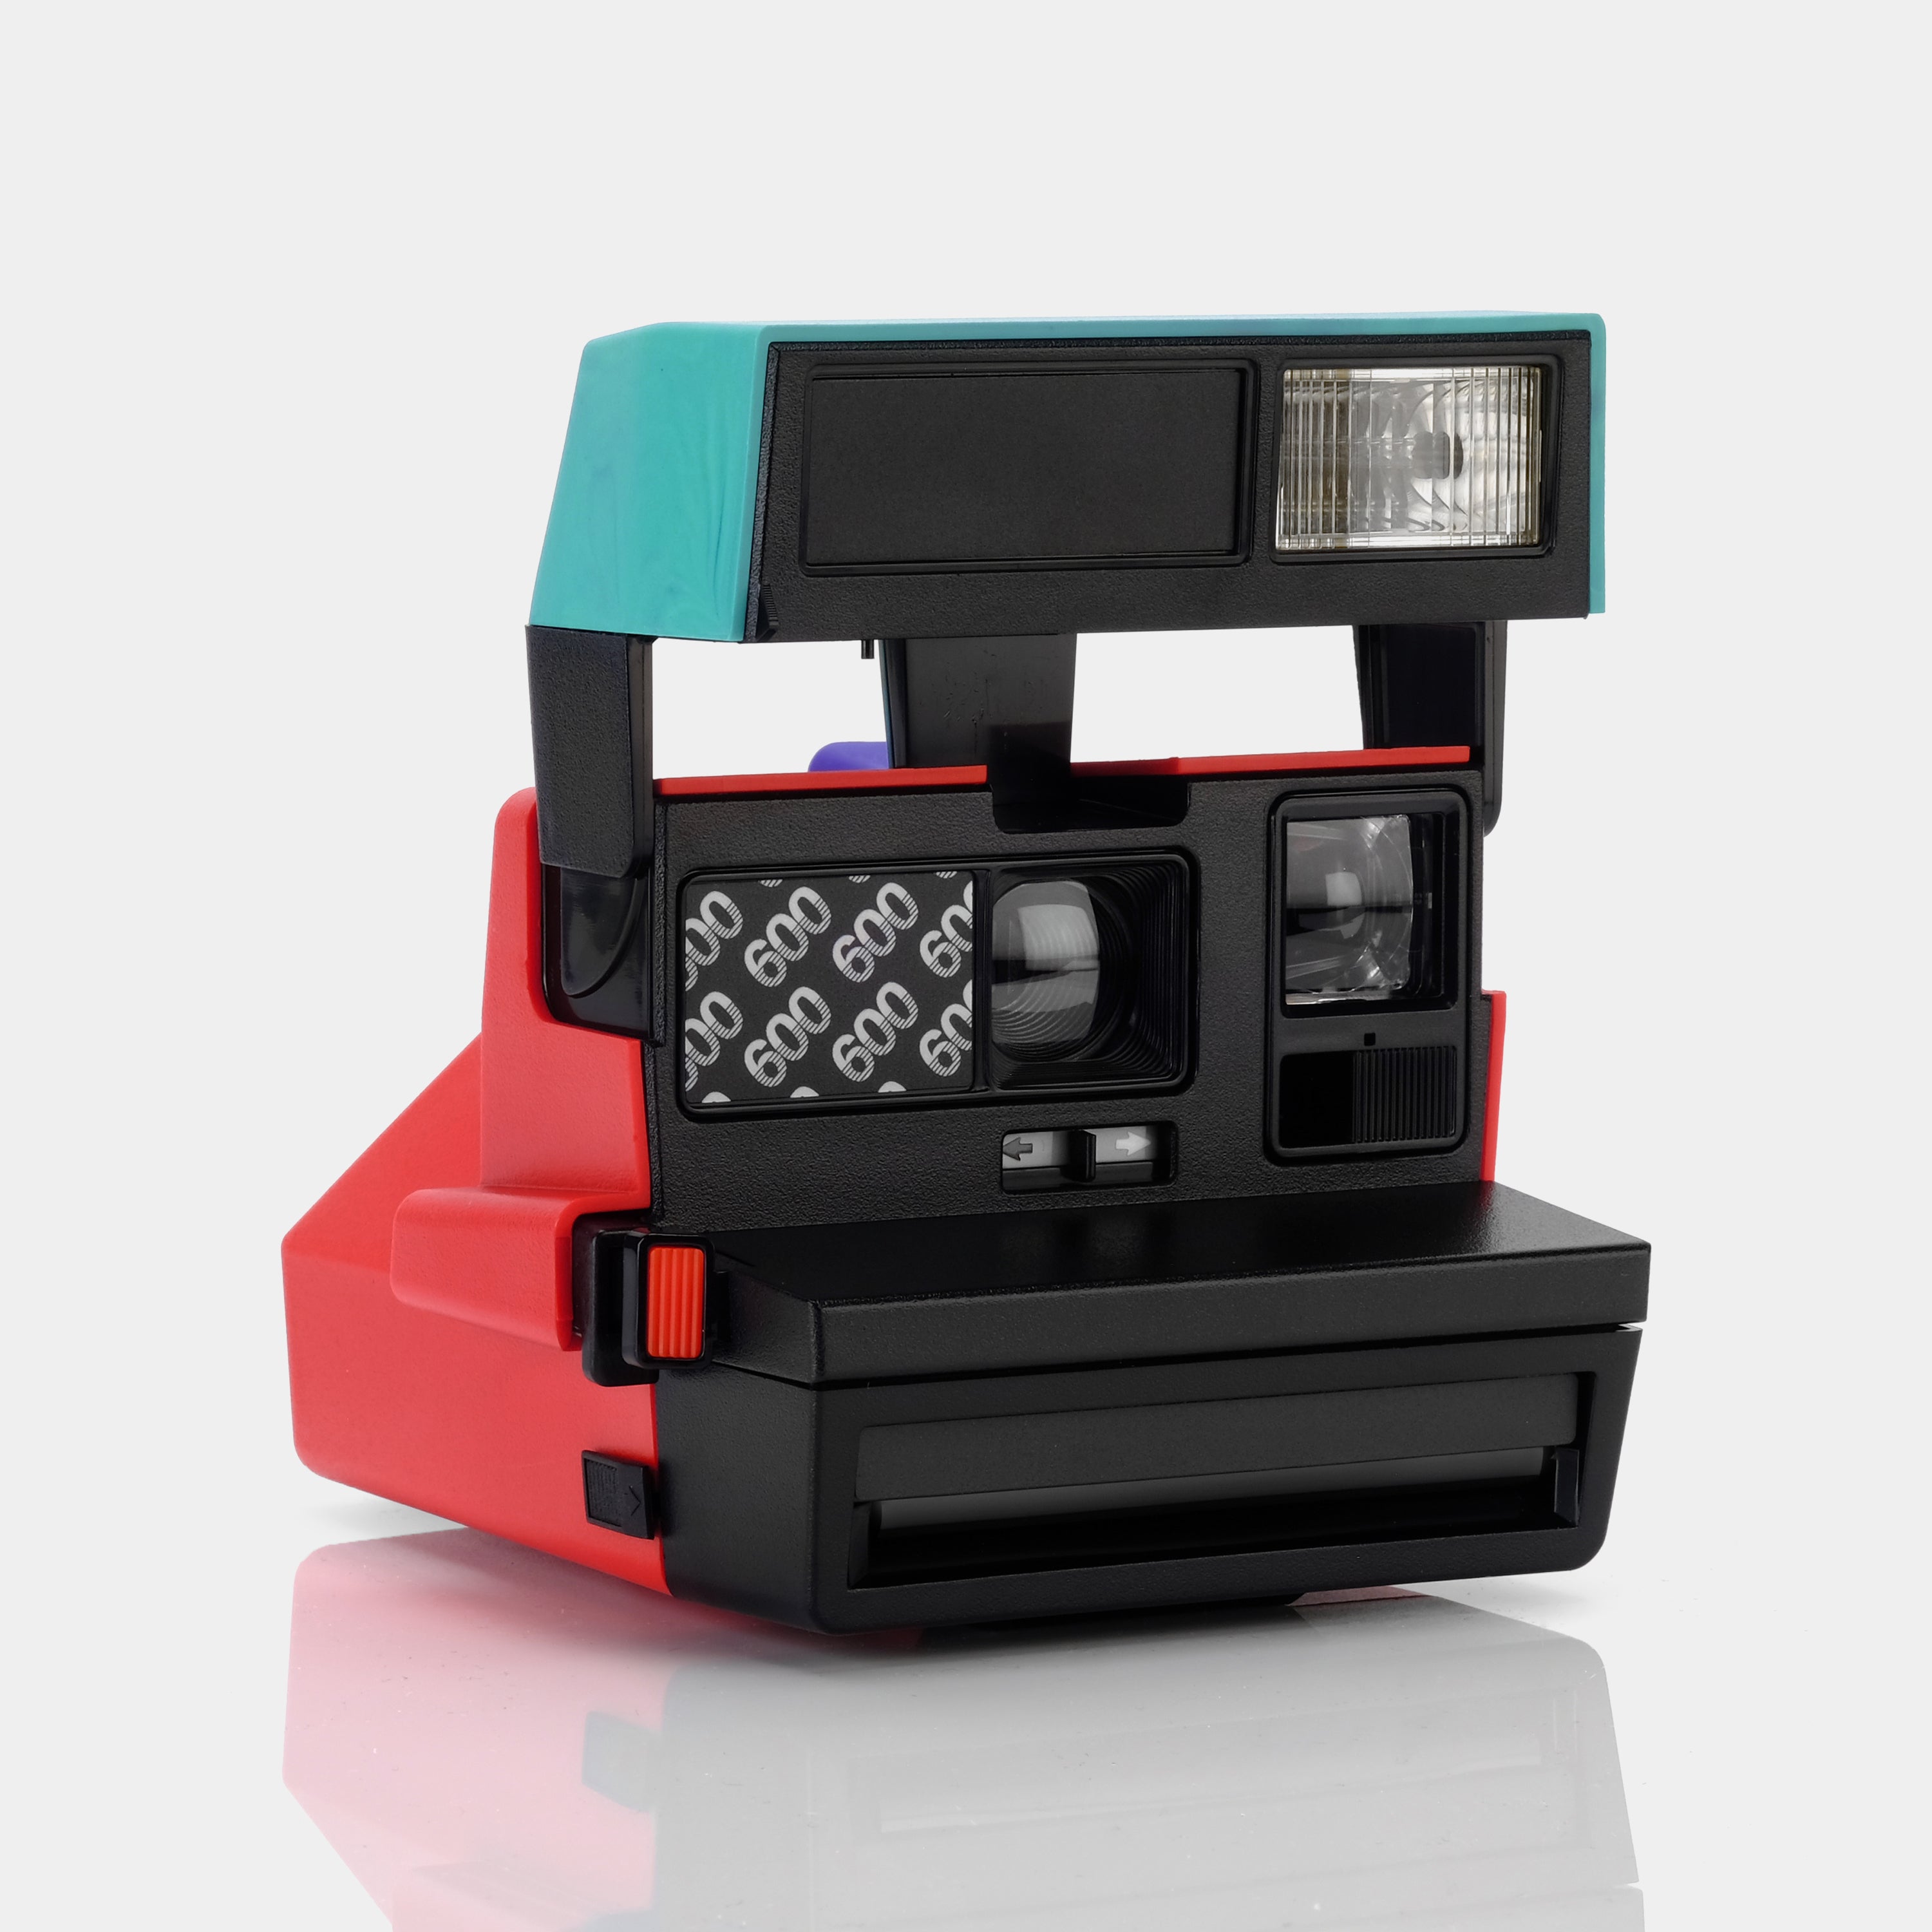 Red, Turquoise and Black Swirl 600 Instant Film Camera